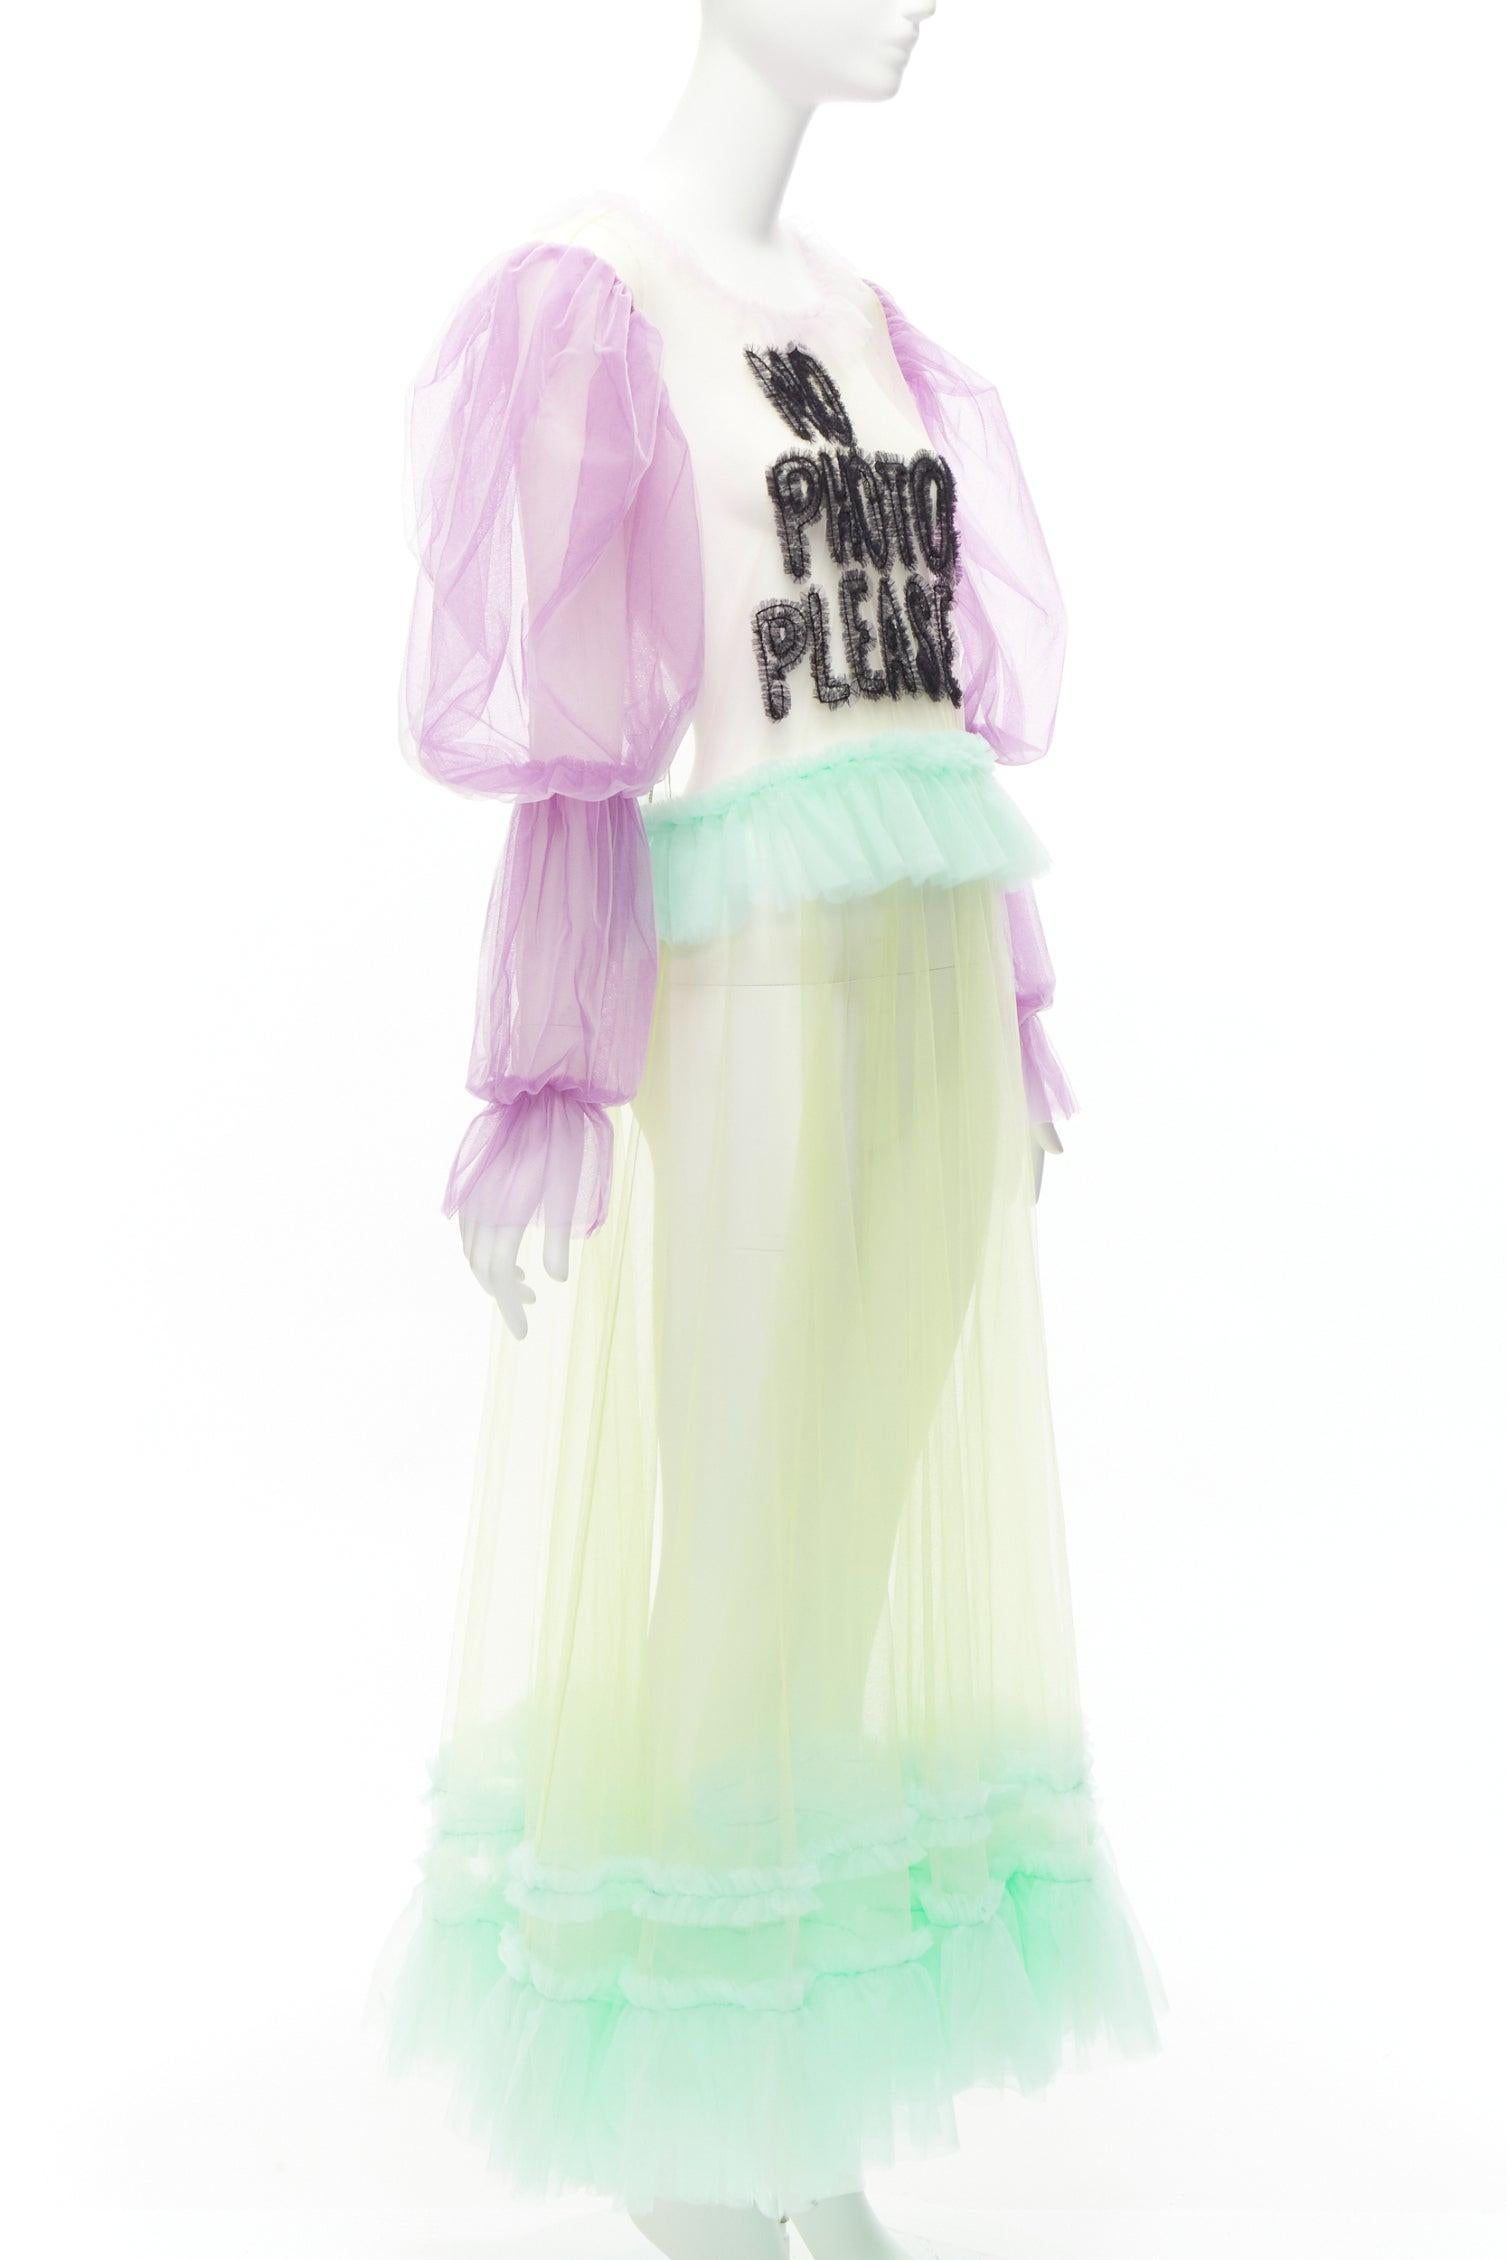 Gray VIKTOR ROLF 2019 TULLE No Photos Please ruffle pastel puff sleeves sheer dress M For Sale